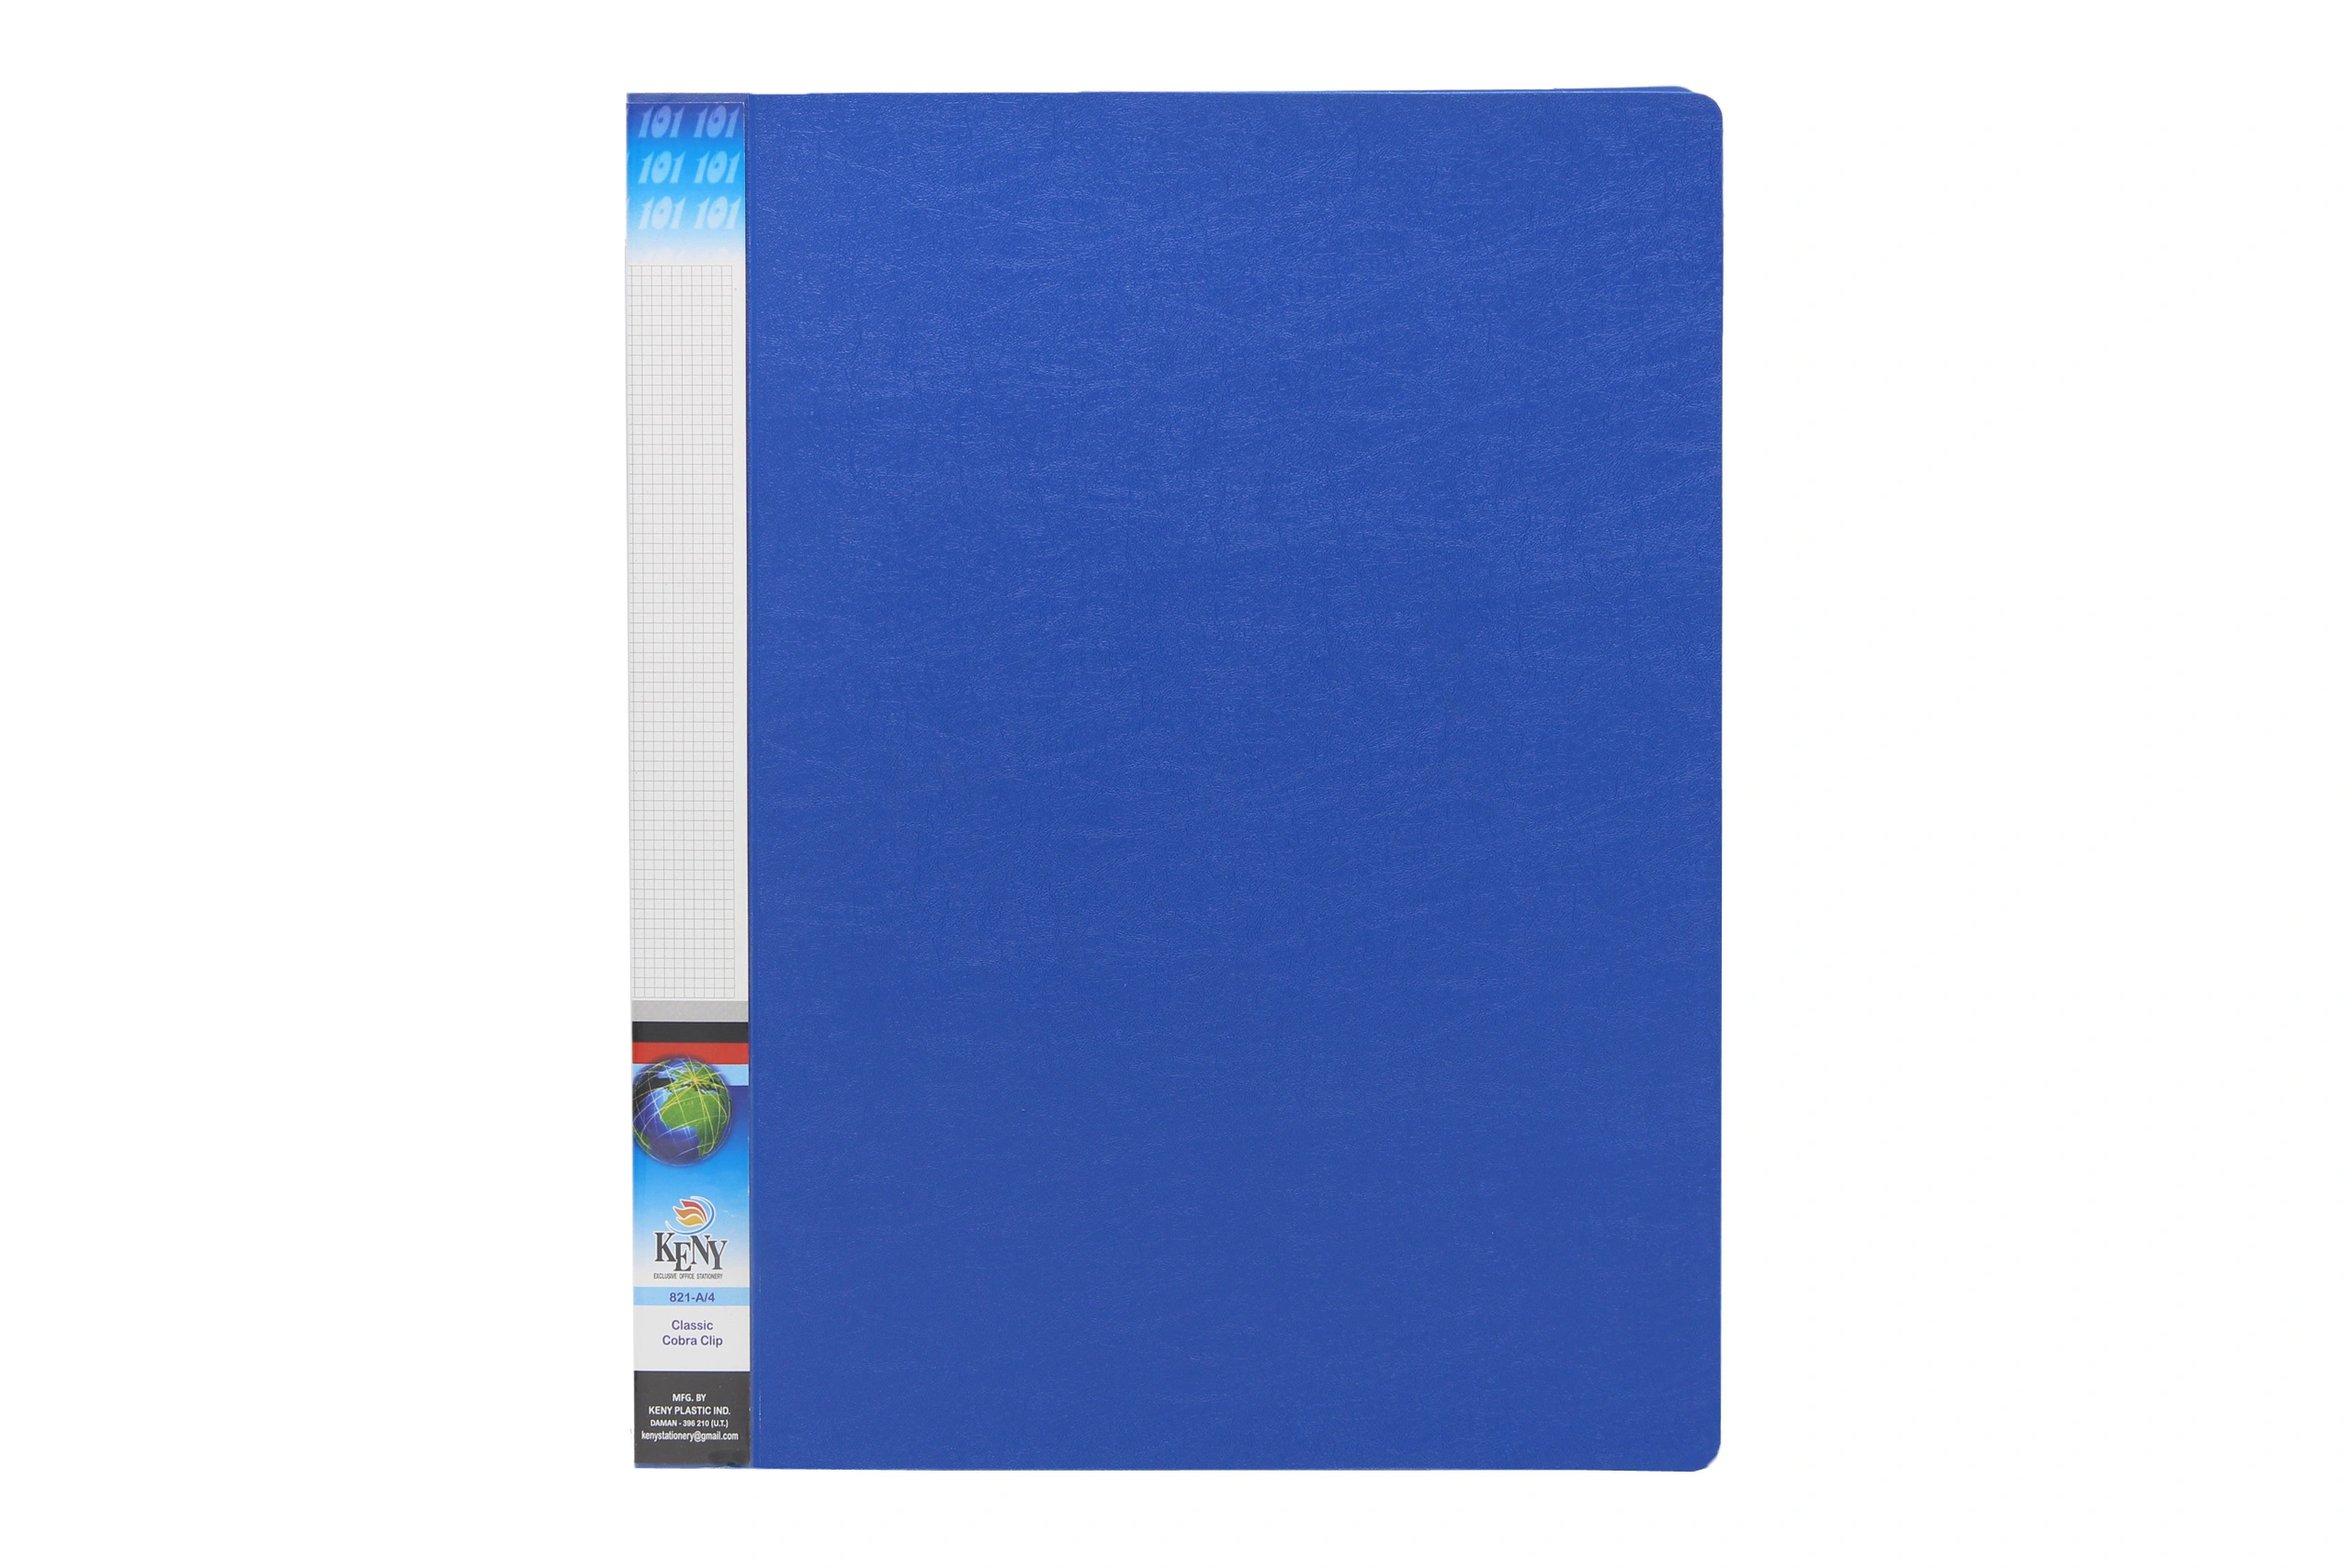 Keny Ring Binder | Best for A4 Size Papers | 4D Shaped 25mm Rings | D Ring Clip | (824A-4D)-824A4DBLUE